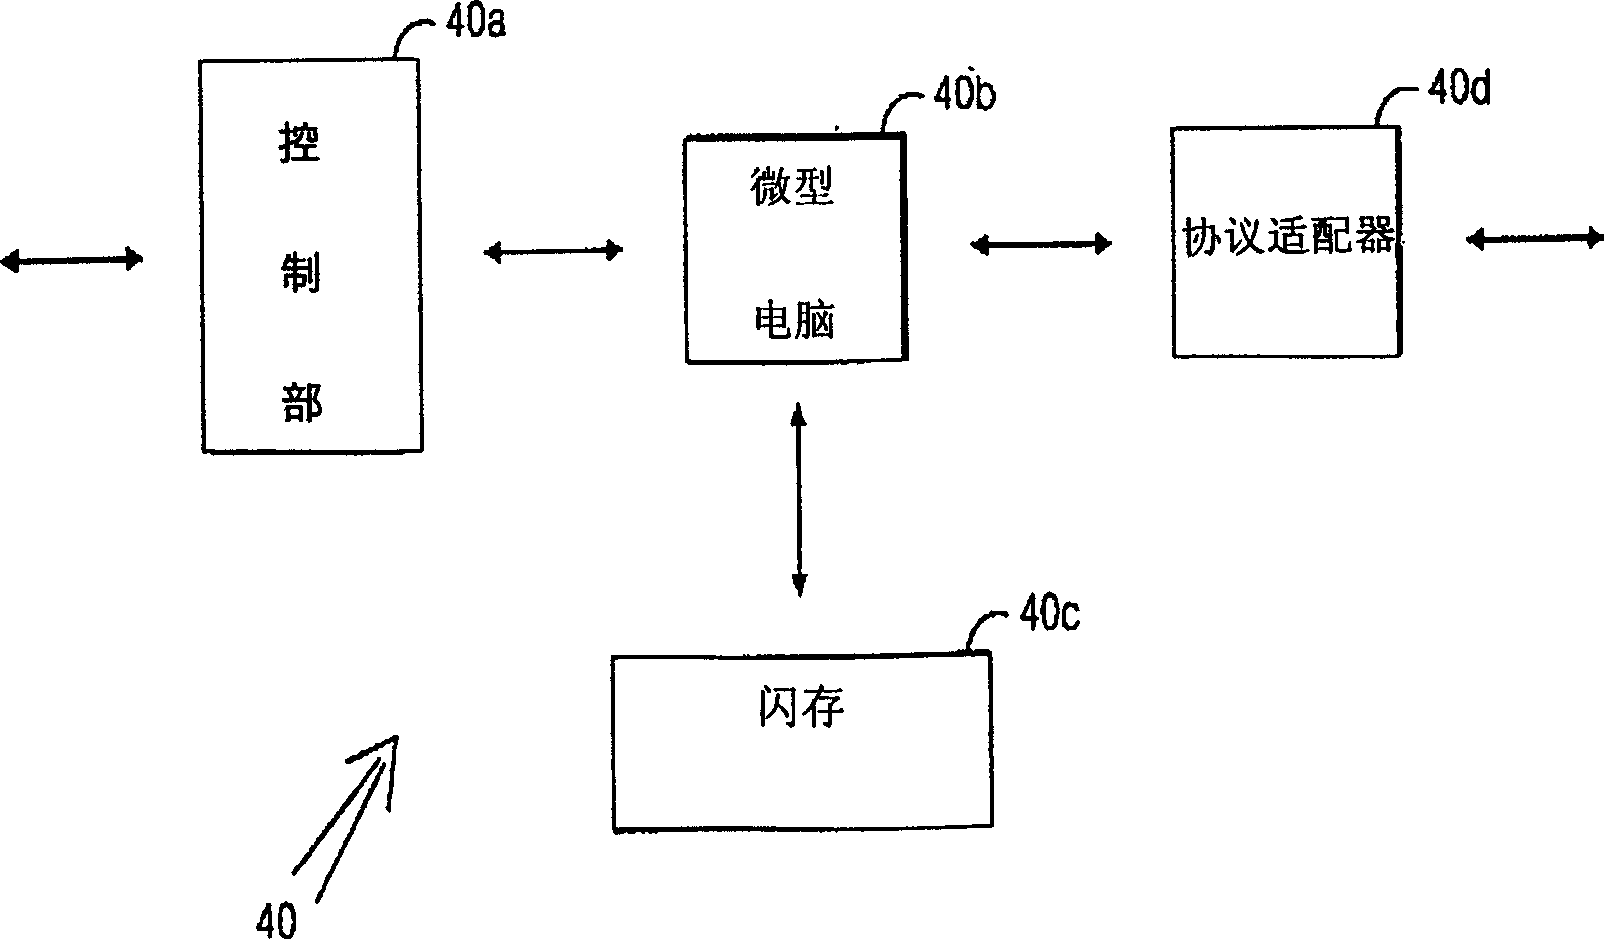 Power control device and method for air conditioner